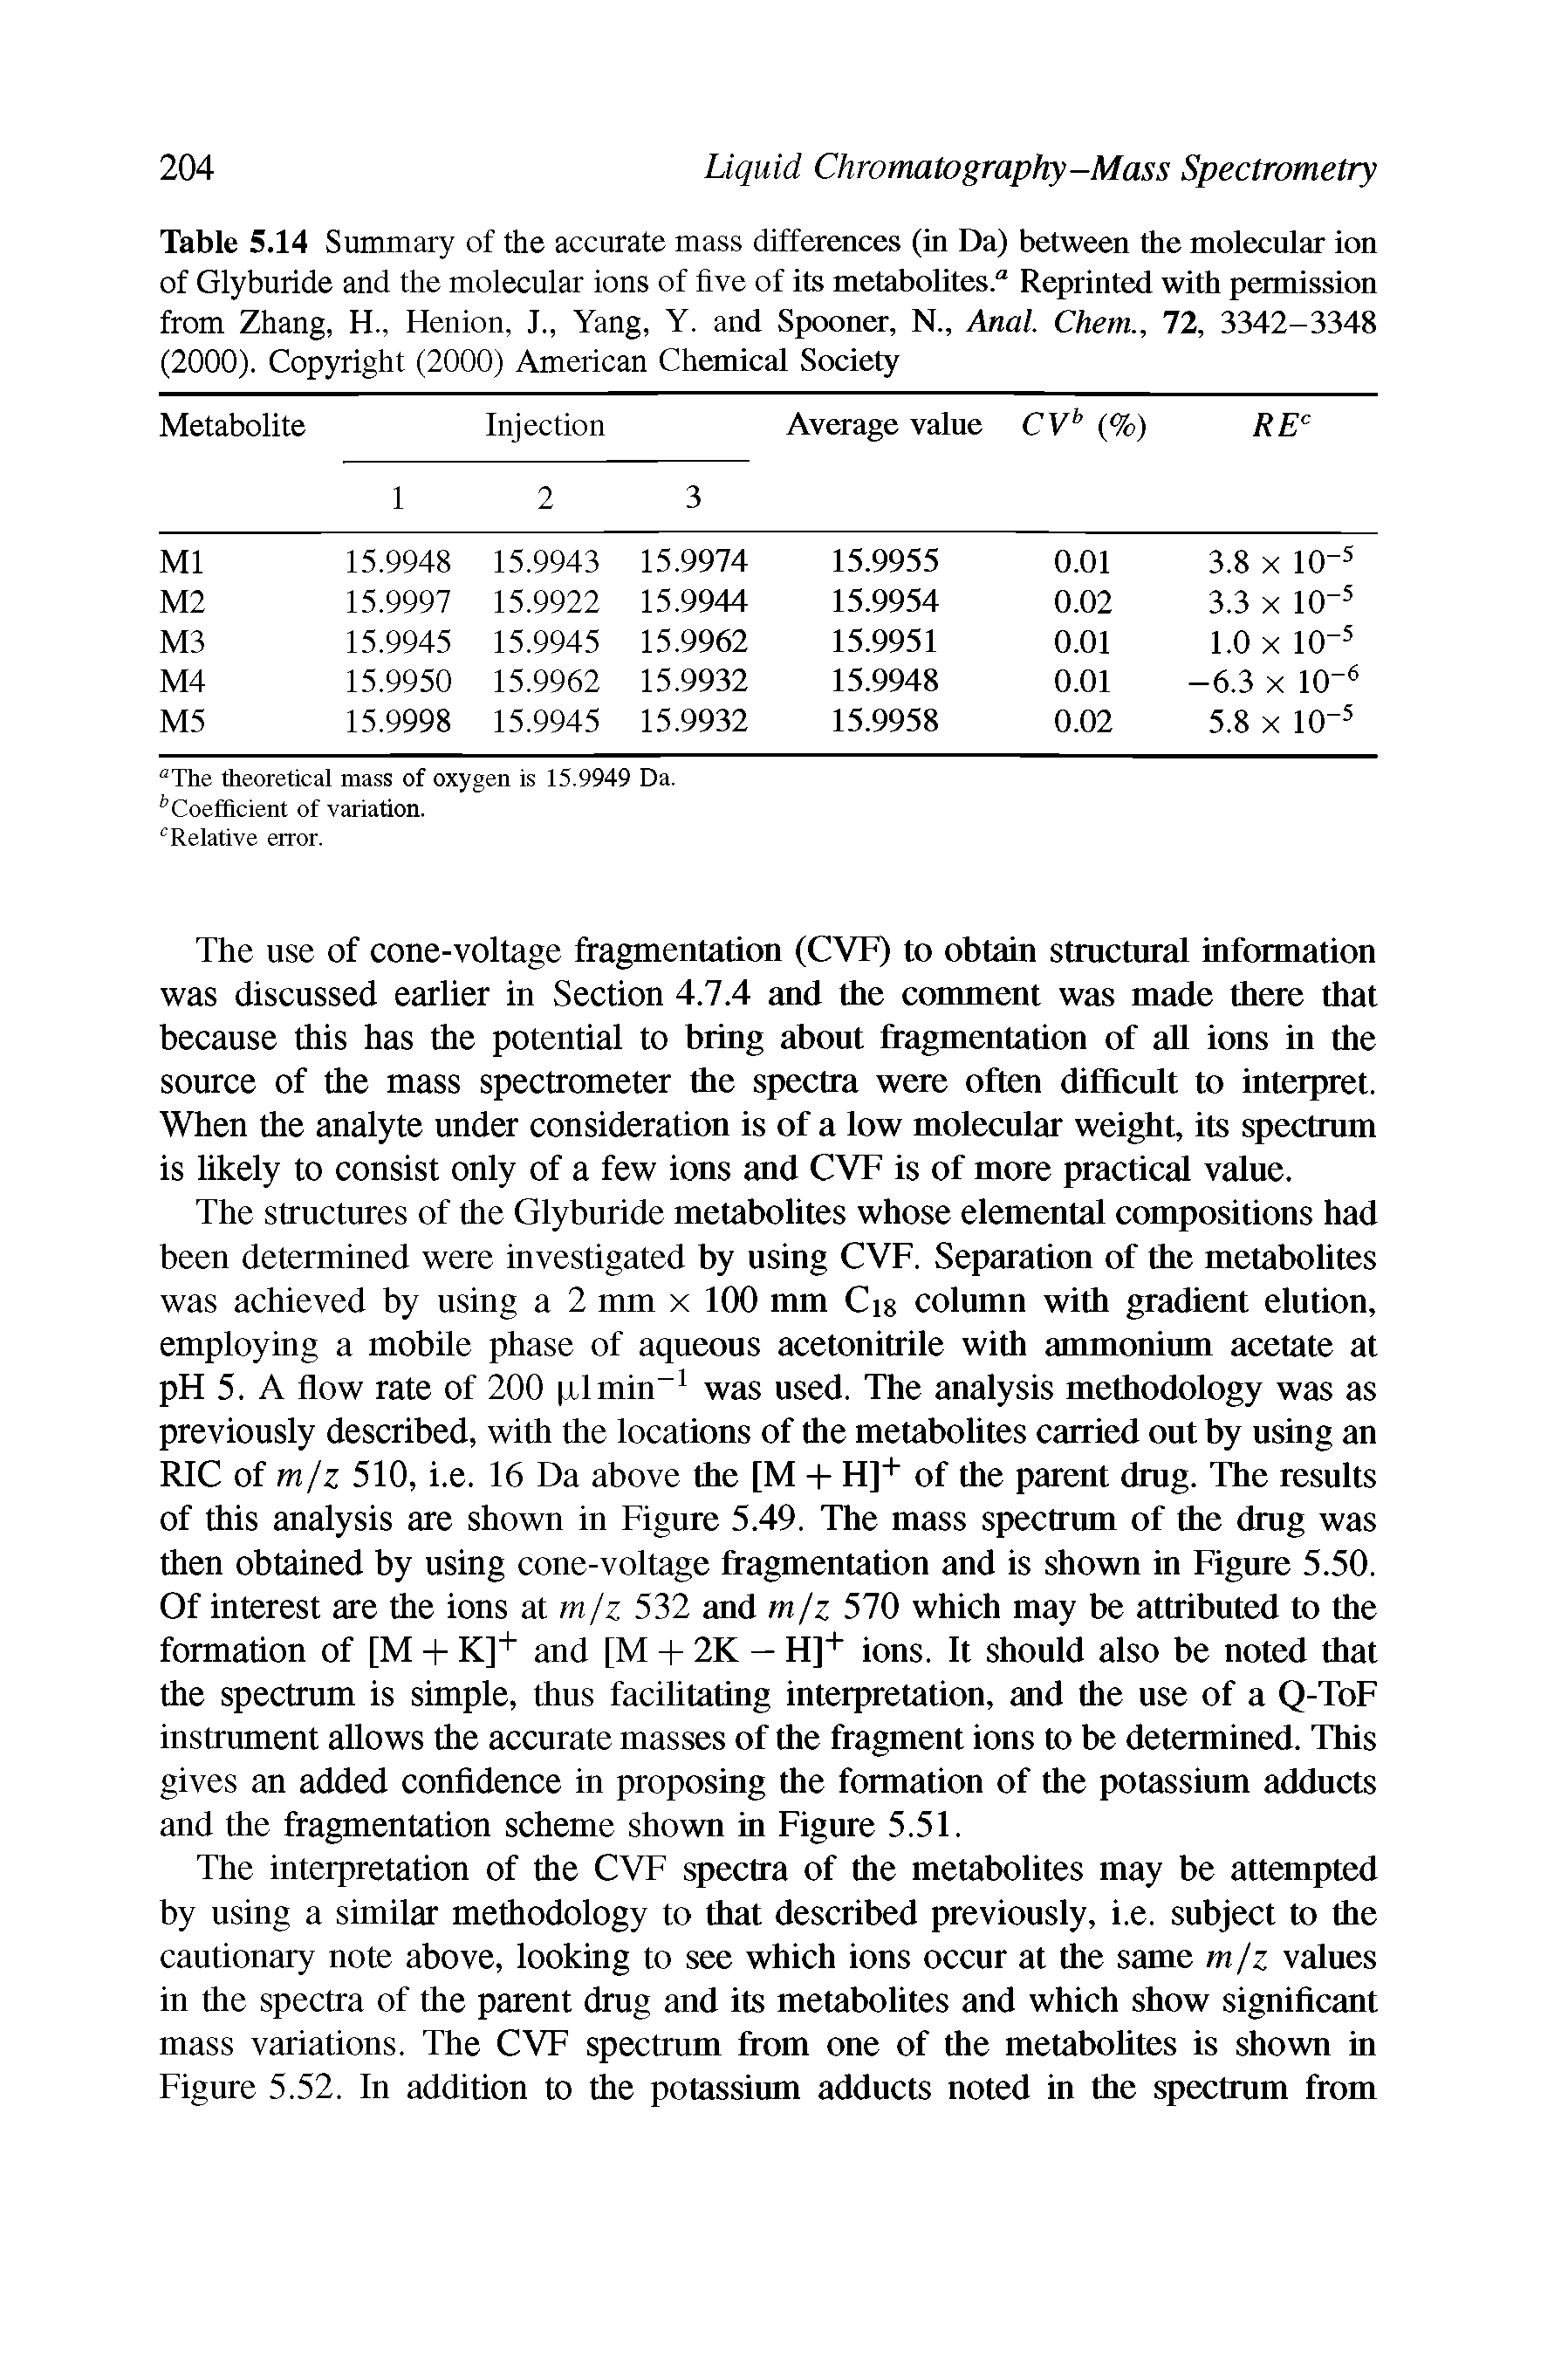 Table 5.14 Summary of the accurate mass differences (in Da) between the molecnlar ion of Glyburide and the molecular ions of five of its metabolites." Reprinted with permission from Zhang, H., Henion, J., Yang, Y. and Spooner, N., Anal. Chem., 72, 3342-3348 (2000). Copyright (2000) American Chemical Society...